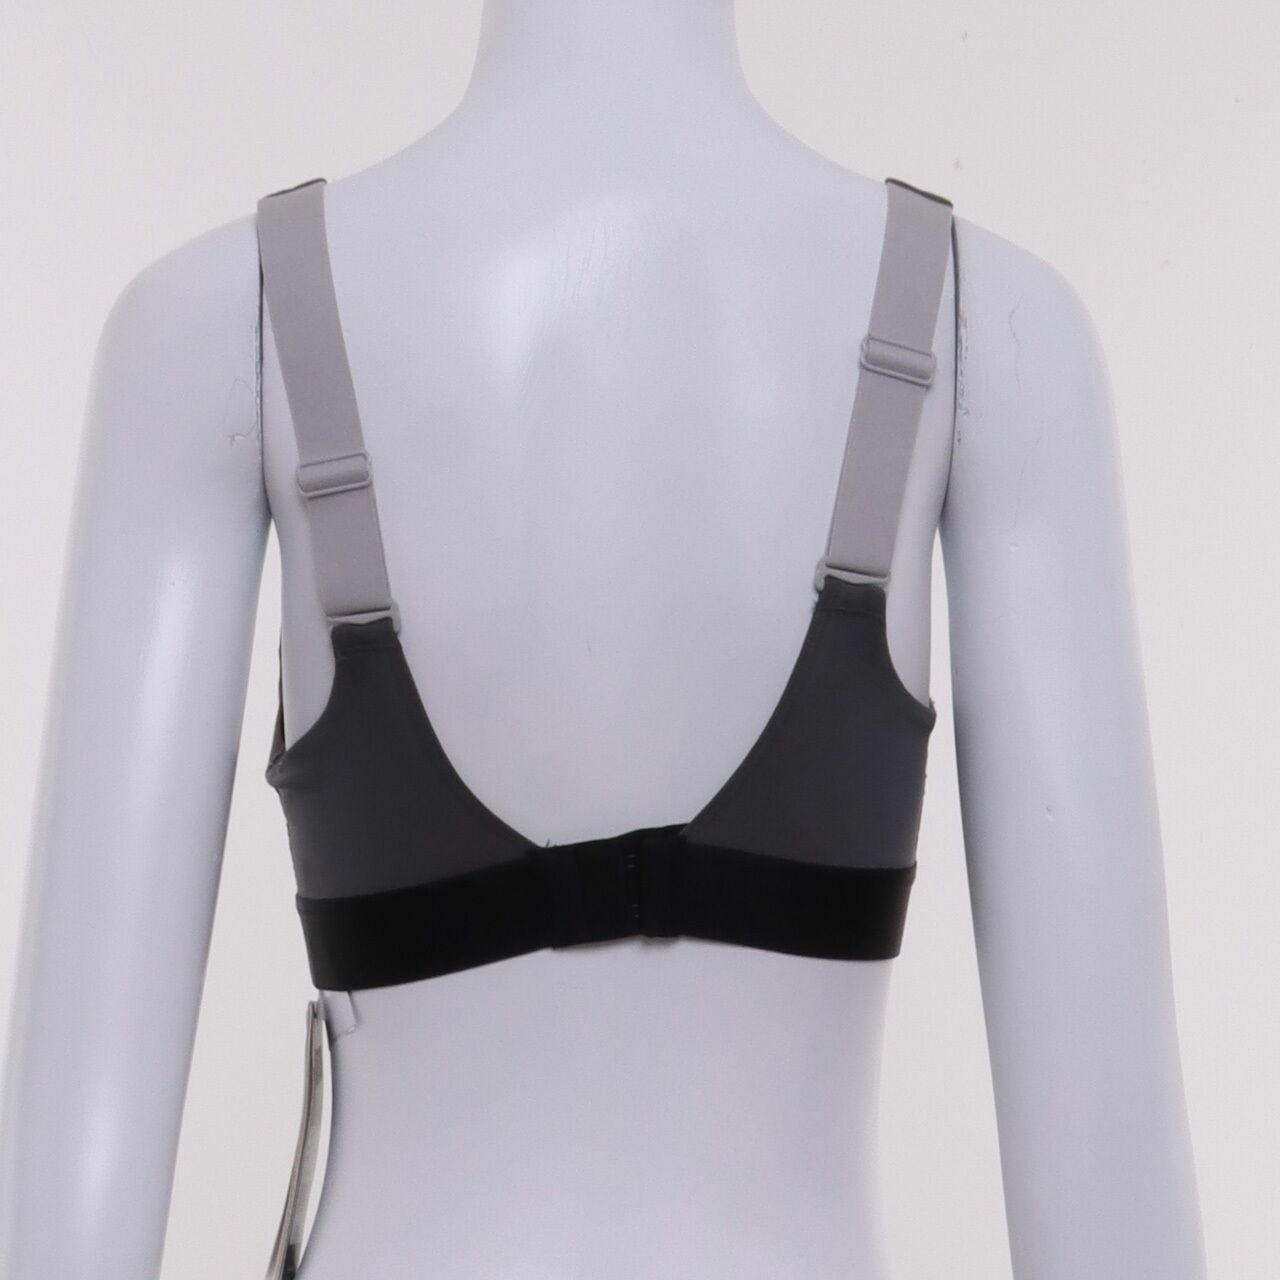 Adidas Stronger For It Soft Bra